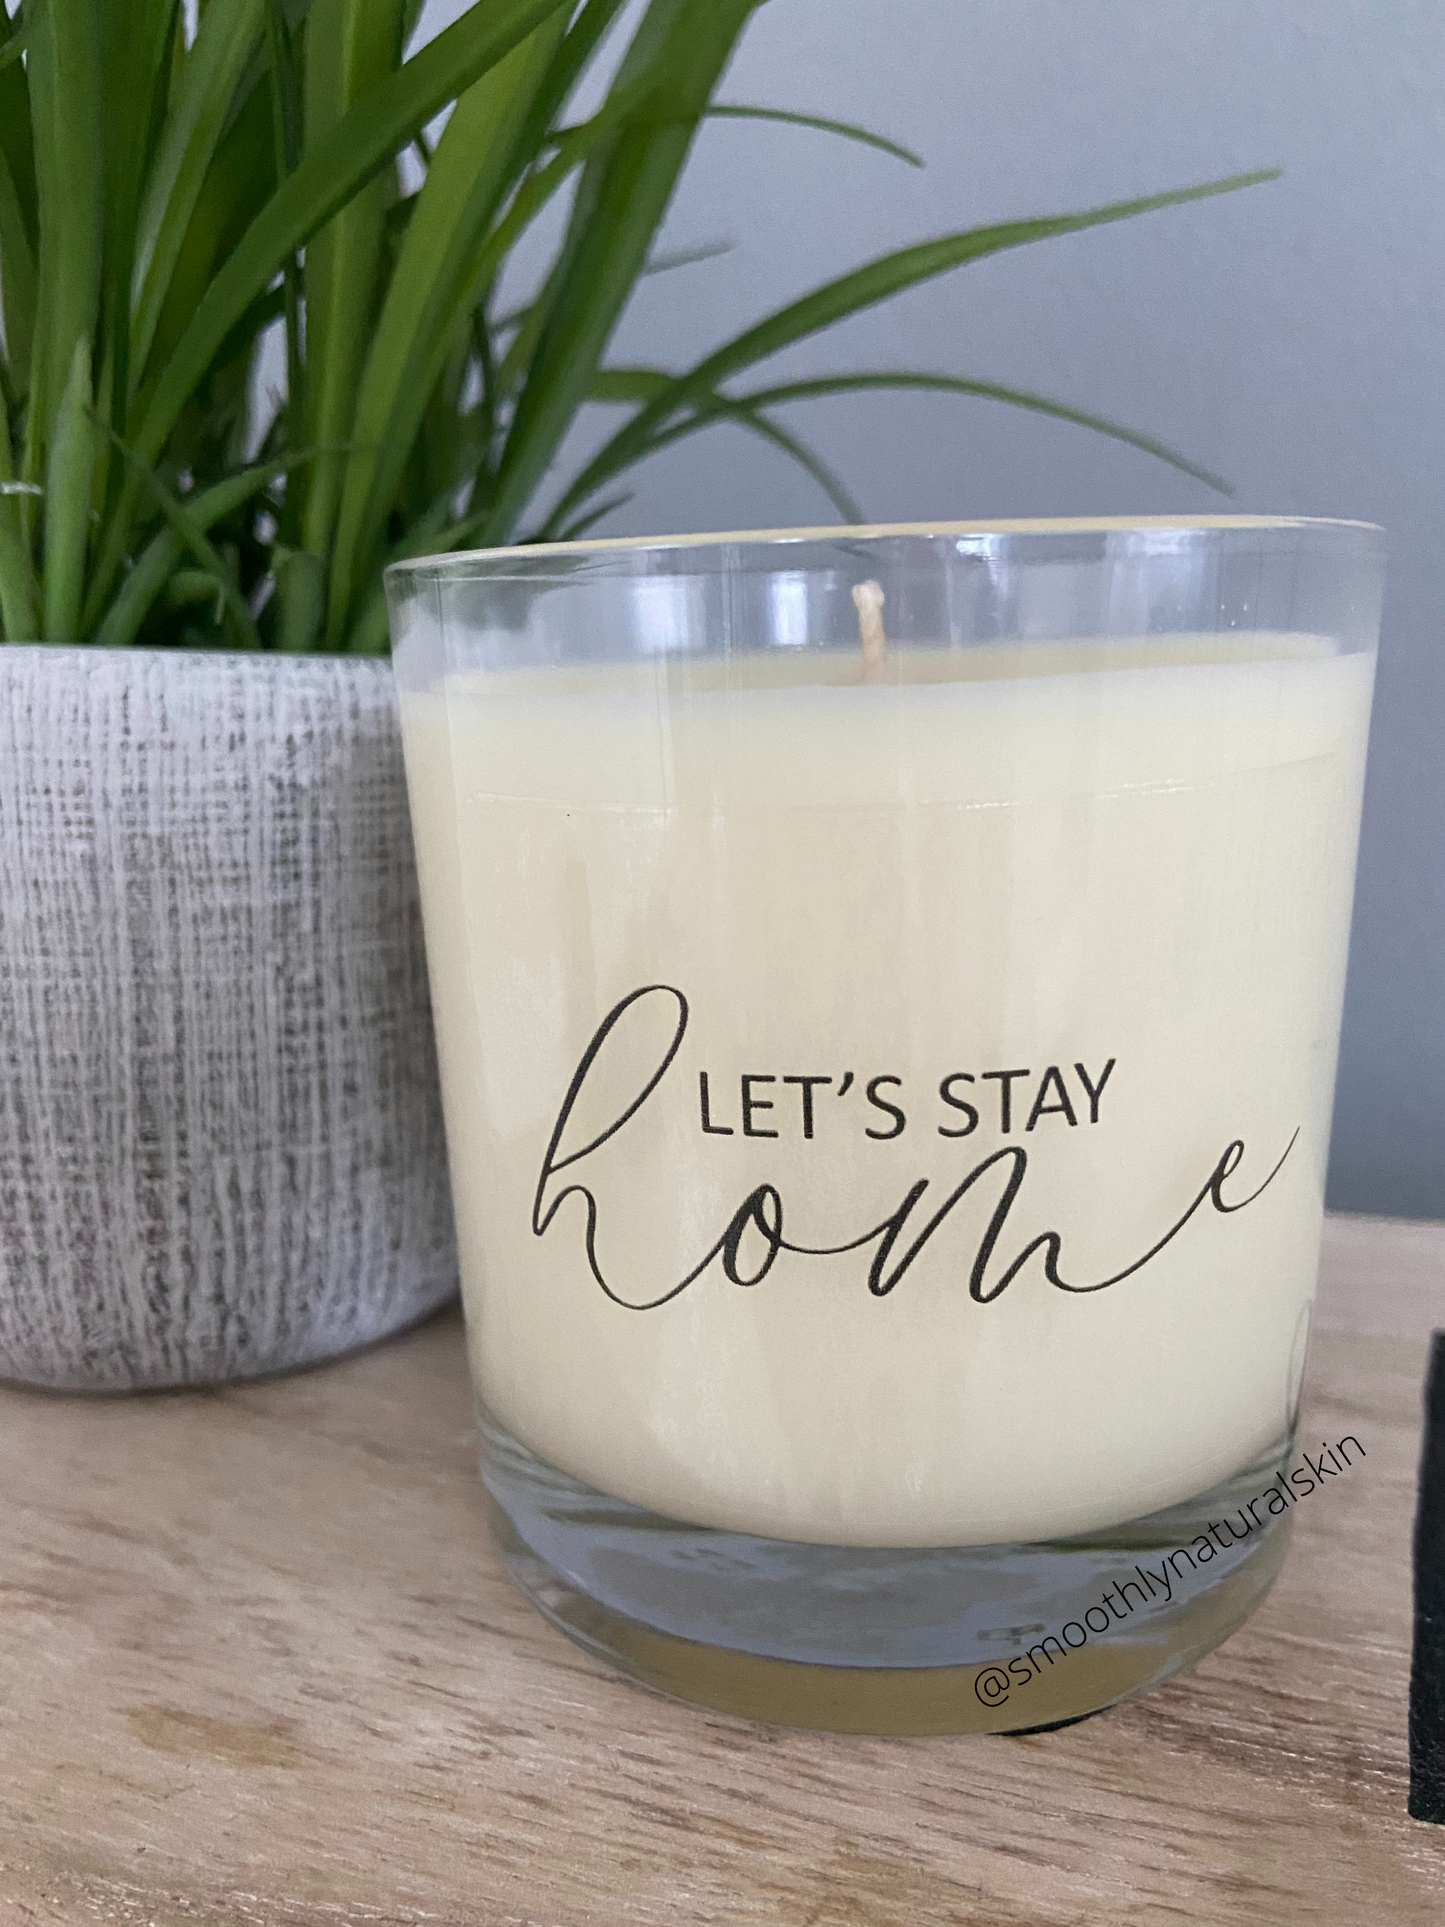 Let's stay home candle, is a perfect gift for that special person in your life. These unique candles are hand poured in small batches.   Ingredients:   Natural Soy Wax, Cotton Wick (Lead & Zinc Free) and Phthalate Free Fragrance.  Volume: Net Wt. 7 oz. Smoothly Natural Skin